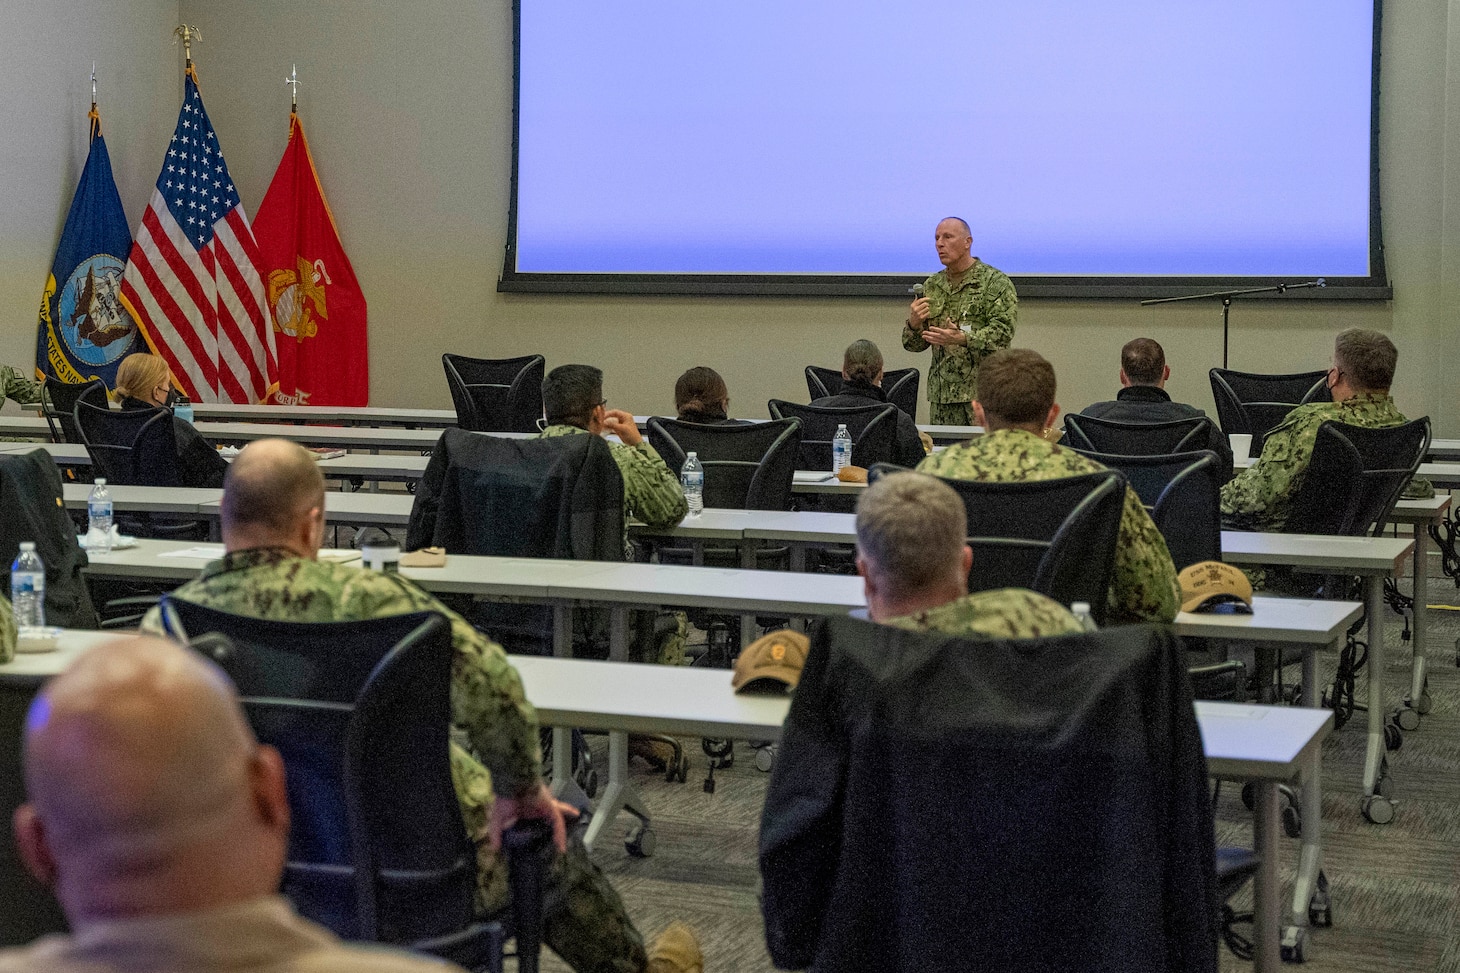 NORFOLK, Va. (Jan. 20, 2022) –  Murad “Mojo” Raheem, regional administrator for the Office of the Assistant Secretary for Preparedness and Response, Region 2, speaks during a Fleet Medical Training at Navy Warfare Development Command (NWDC), Jan. 20. U.S. 2nd Fleet (C2F) medical team, hosted medical leadership from various medical staffs, ships, and government agencies to discuss the future of Navy Medicine (U.S. Navy photo by Mass Communication Specialist 2nd Class Joshua M. Tolbert)